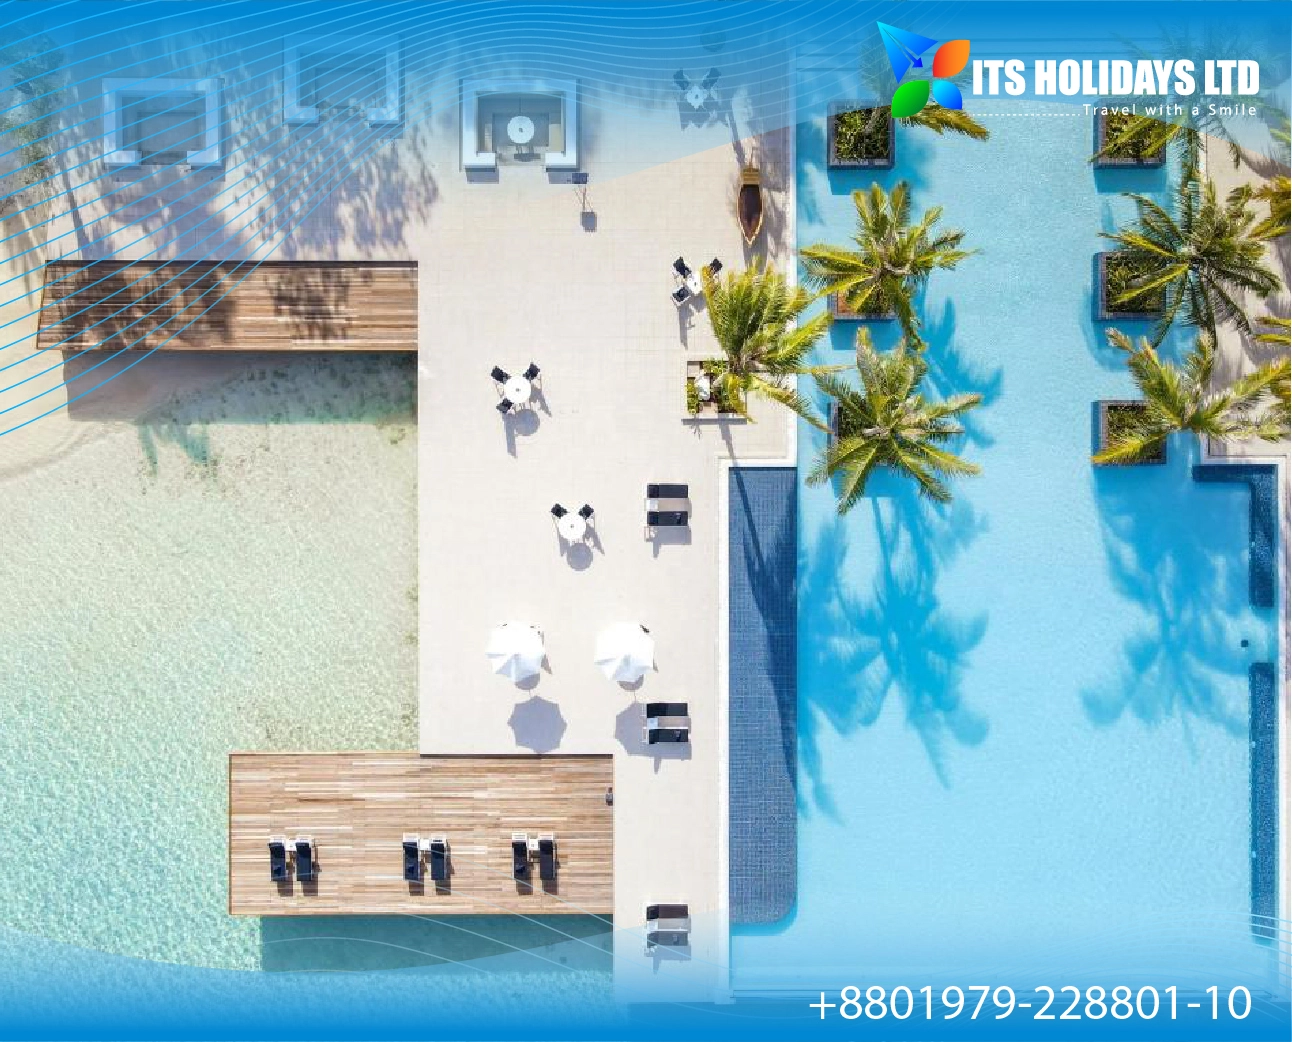 Eid Special Tour Package at Paradise Island In Maldives